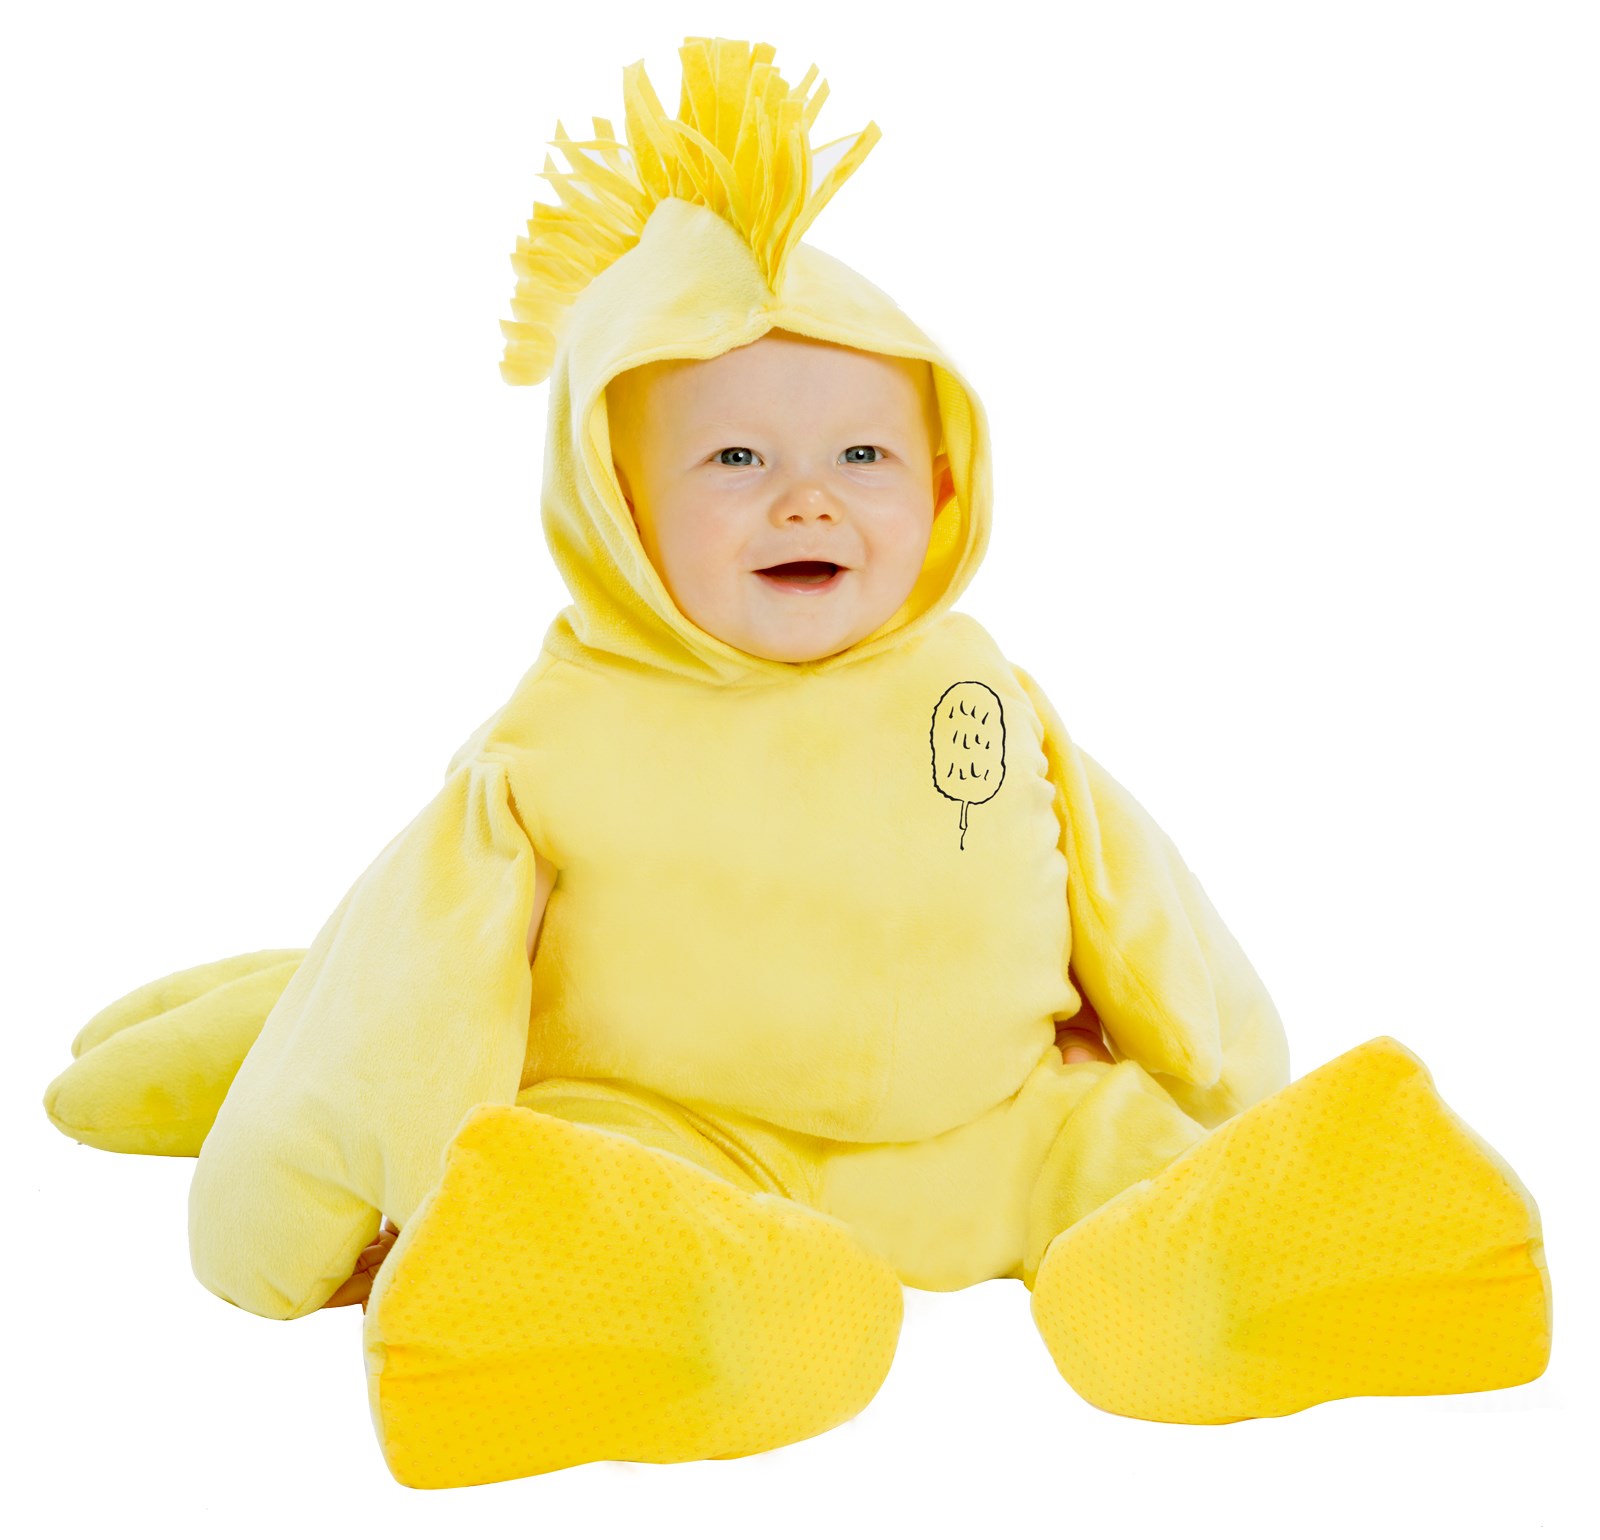 Peanuts: Plush Woodstock Jumpsuit Costume for Toddlers